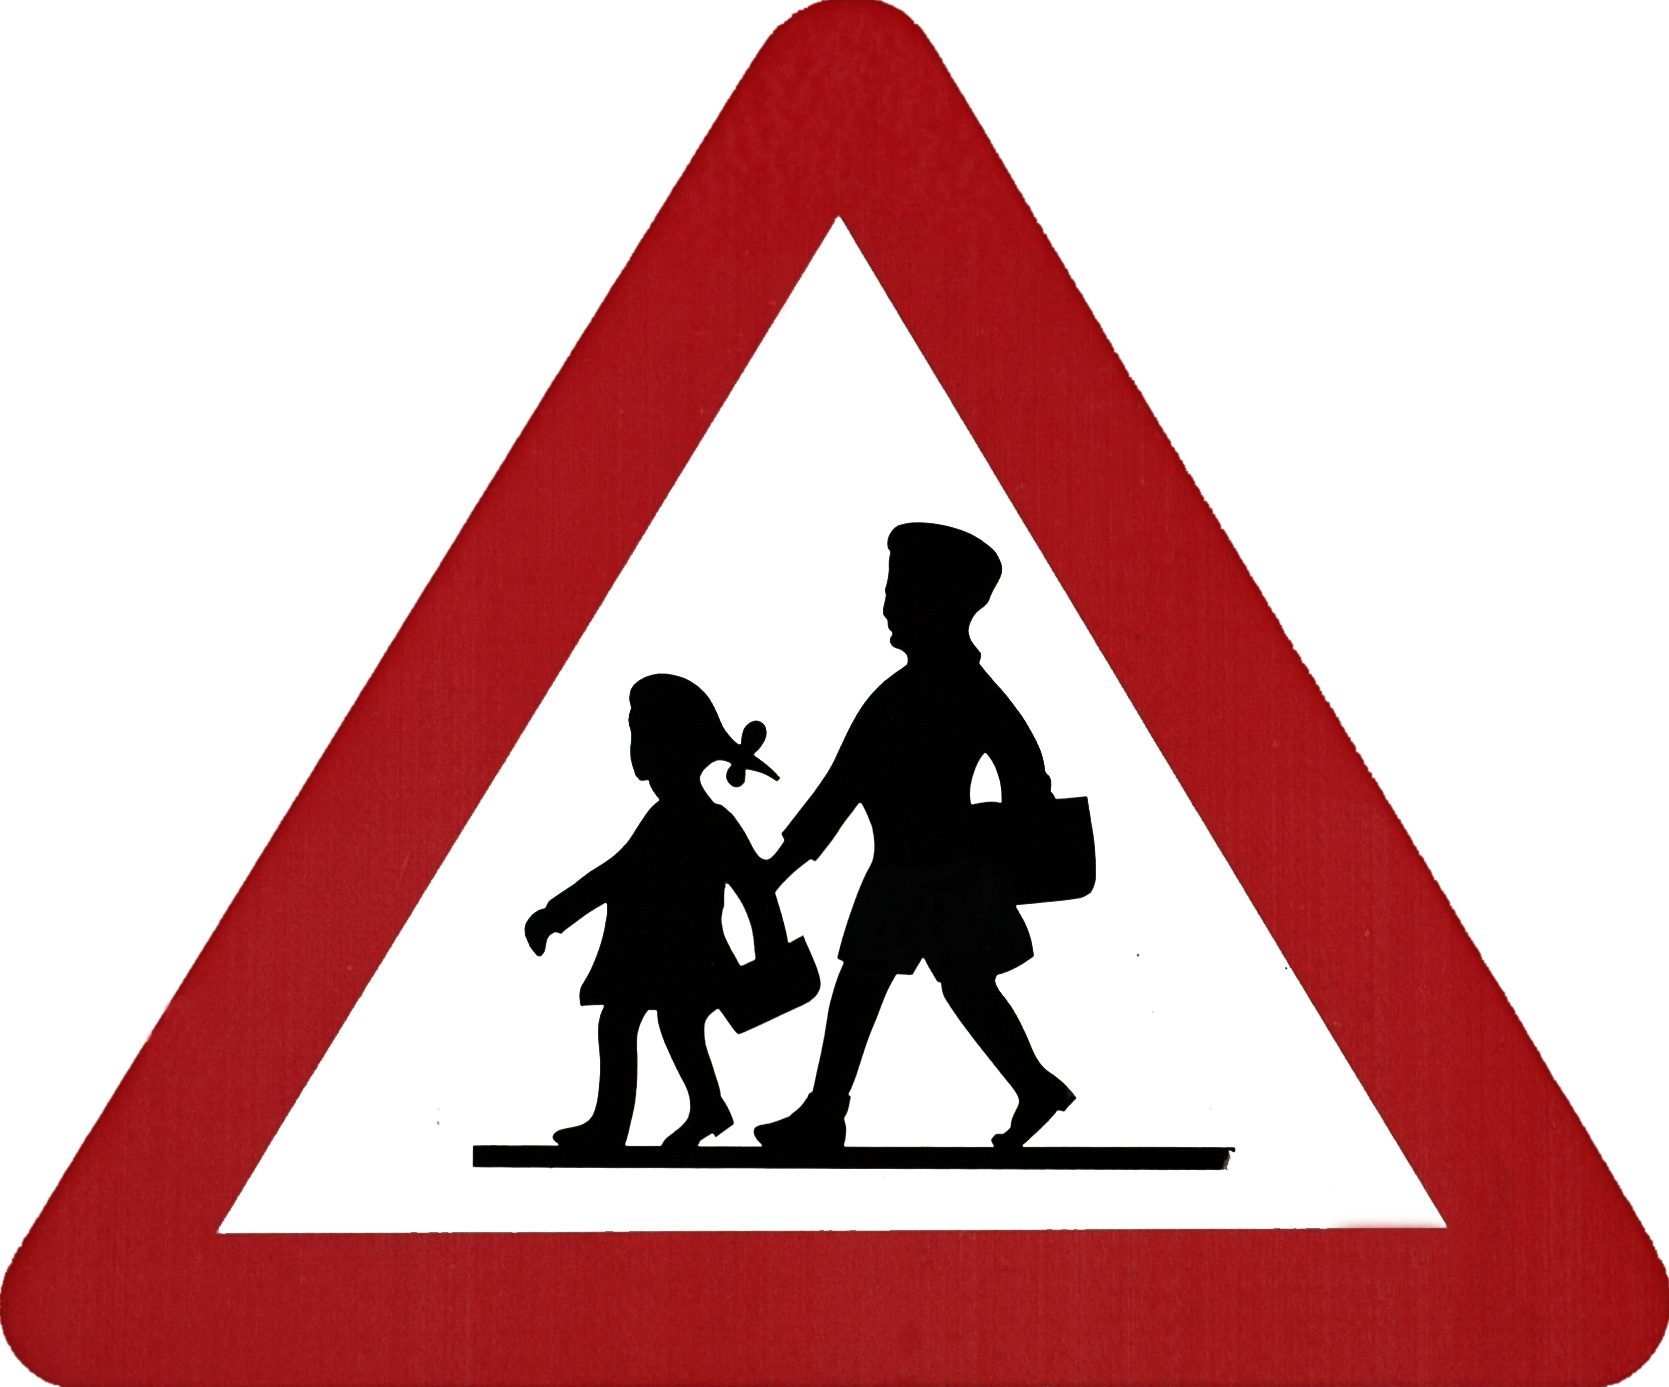 Triangle Warning Sign - ClipArt Best